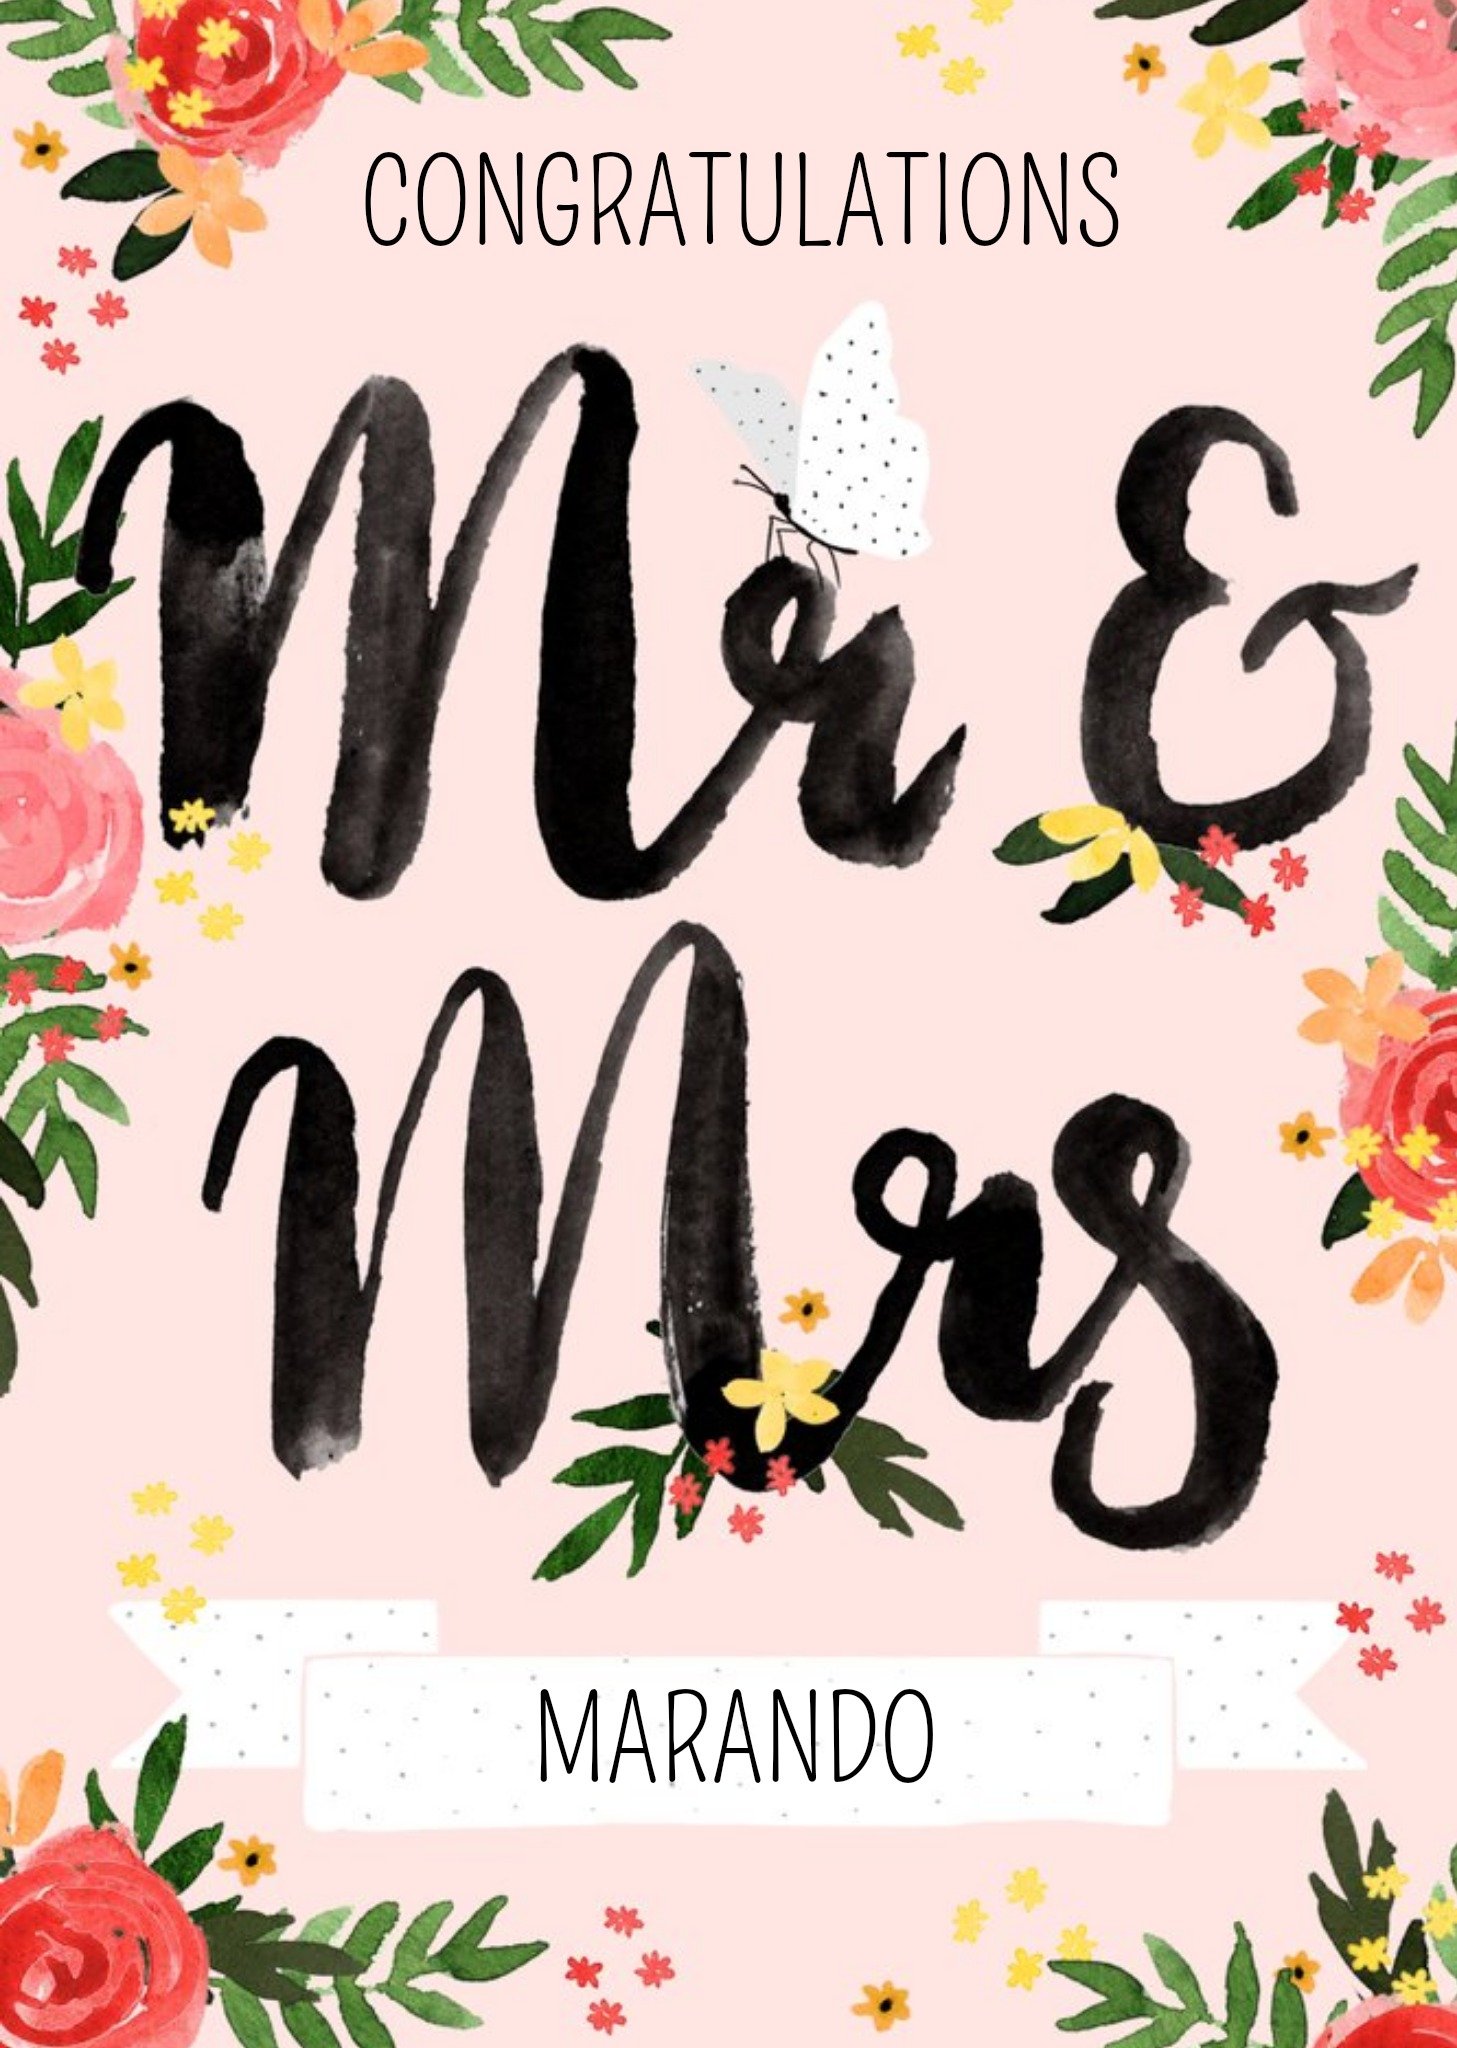 Okey Dokey Design Illustration Of Roses On A Pink Background Mr And Mrs Wedding Congratulations Card